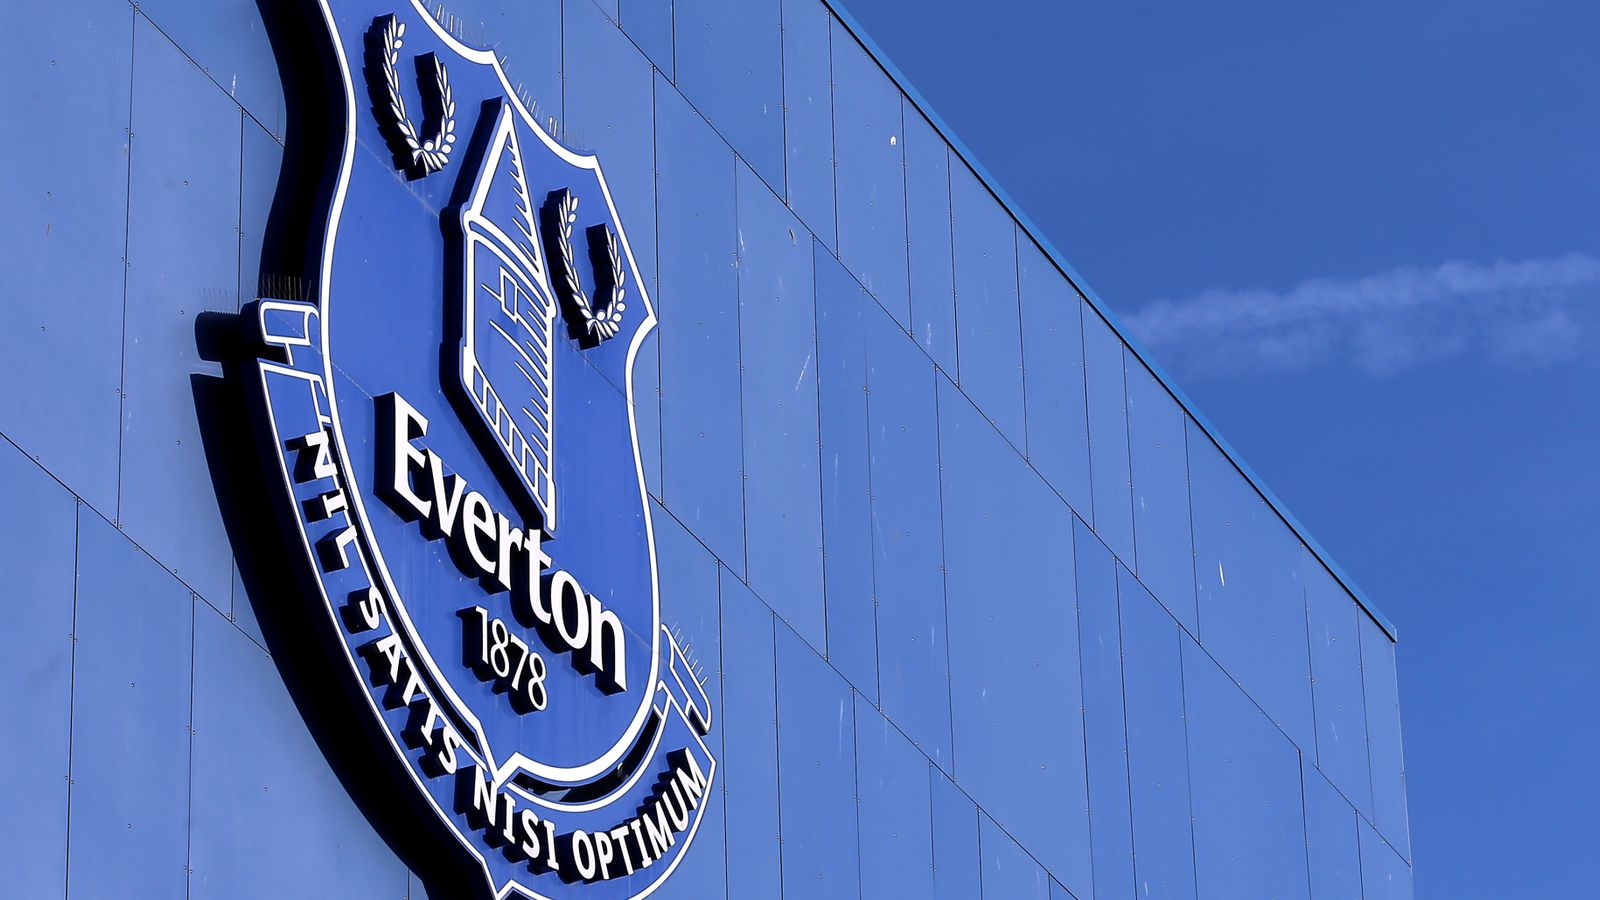 Everton Docked Eight Points in Total for Breaching Profit and Sustainability Rules